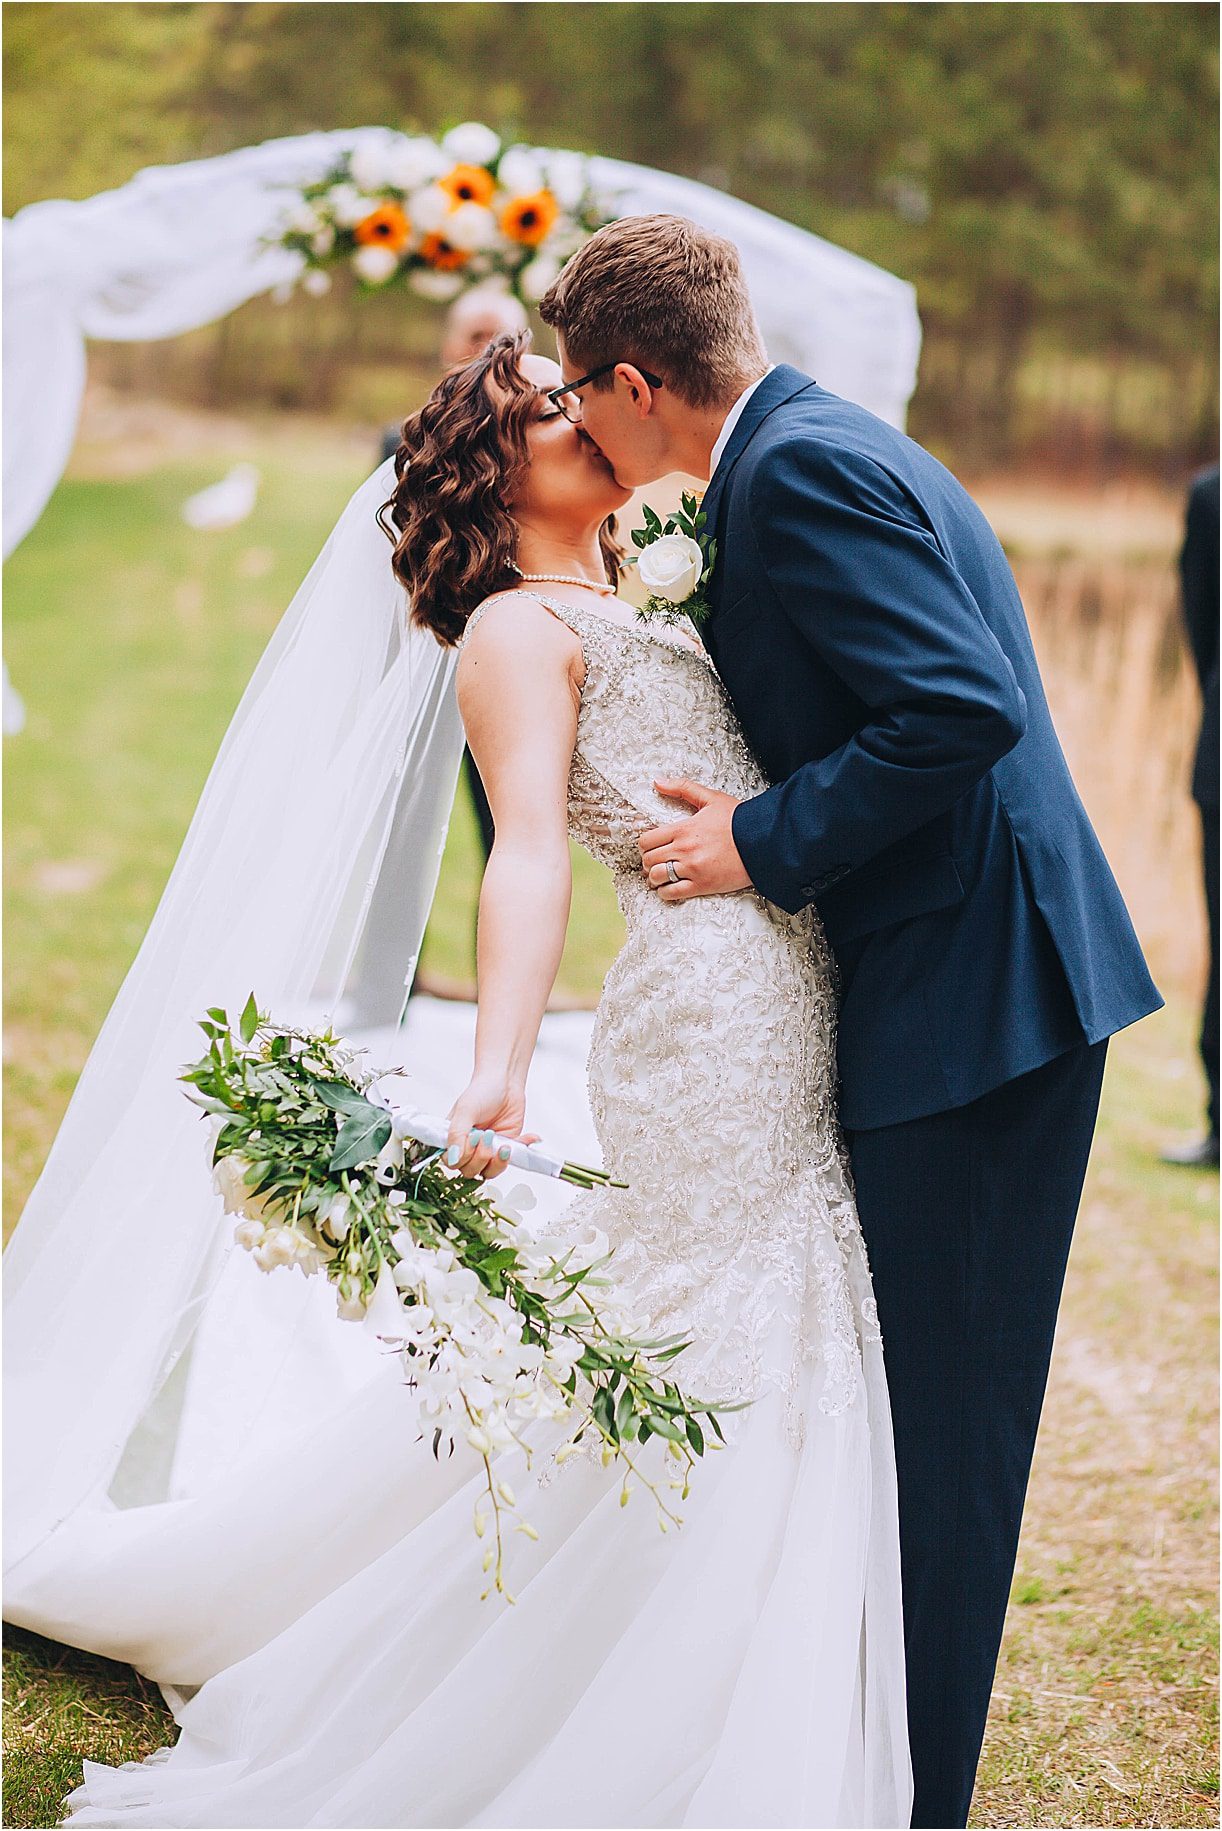 Intimate Ceremony During Covid-19 | Hill City Bride Virginia Weddings Kiss